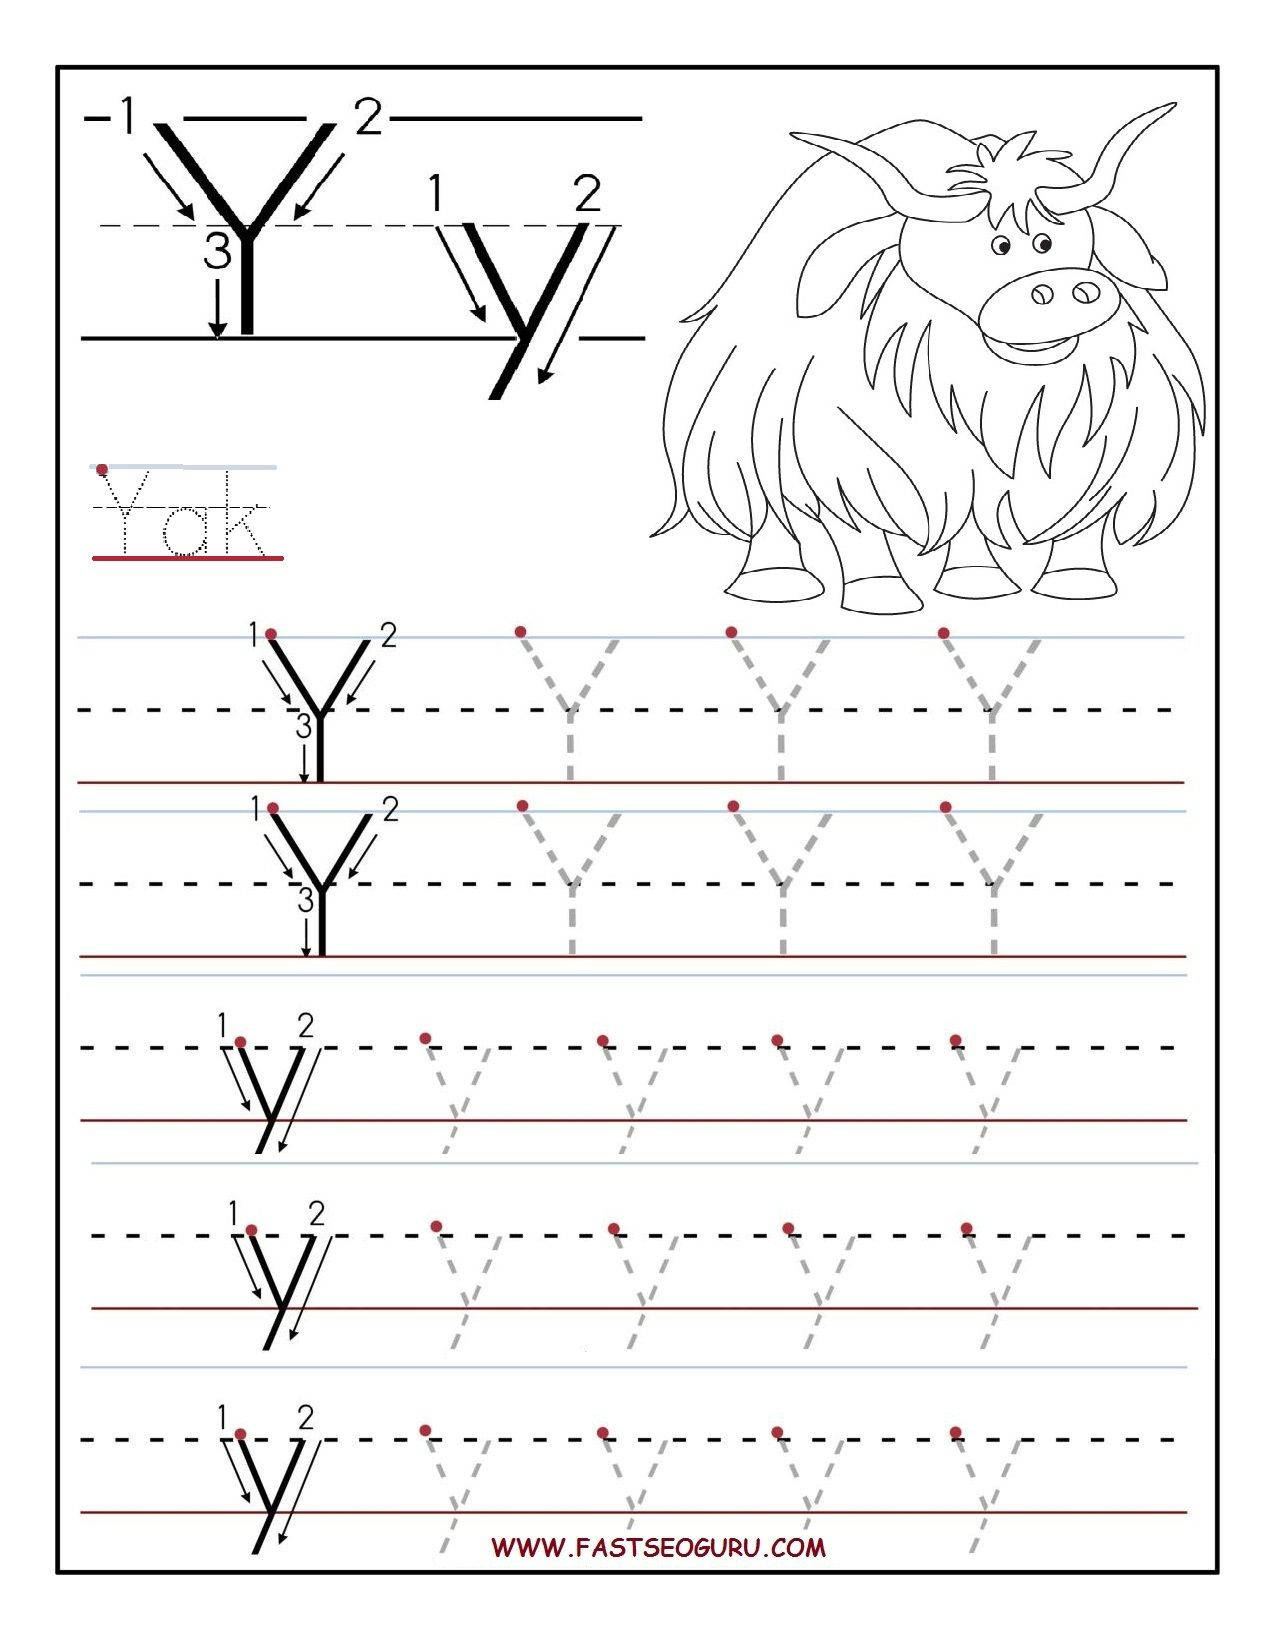 Printable Letter Y Tracing Worksheets For Preschool pertaining to Letter Y Tracing Worksheets Preschool